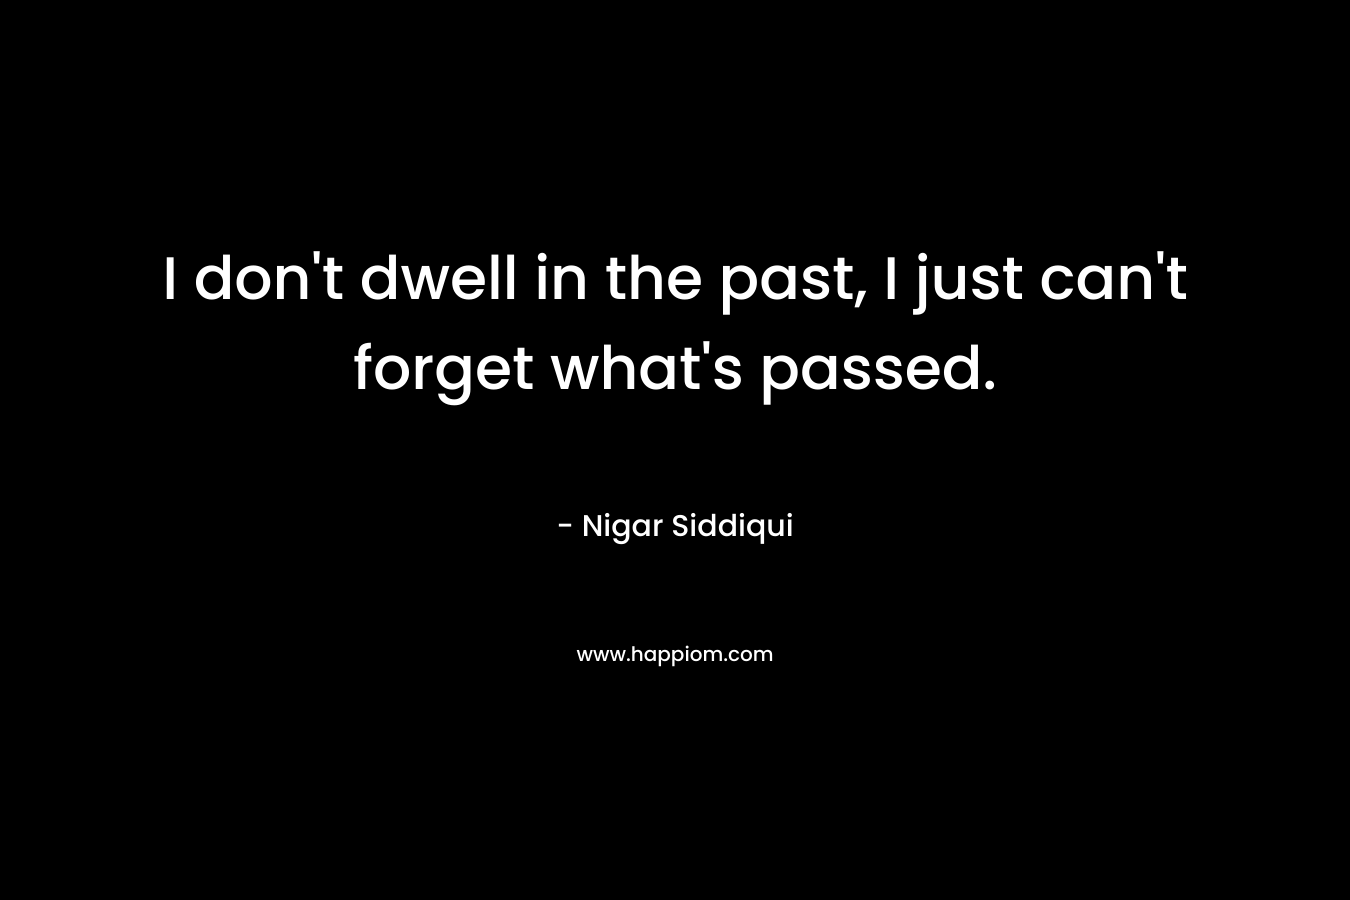 I don’t dwell in the past, I just can’t forget what’s passed. – Nigar Siddiqui